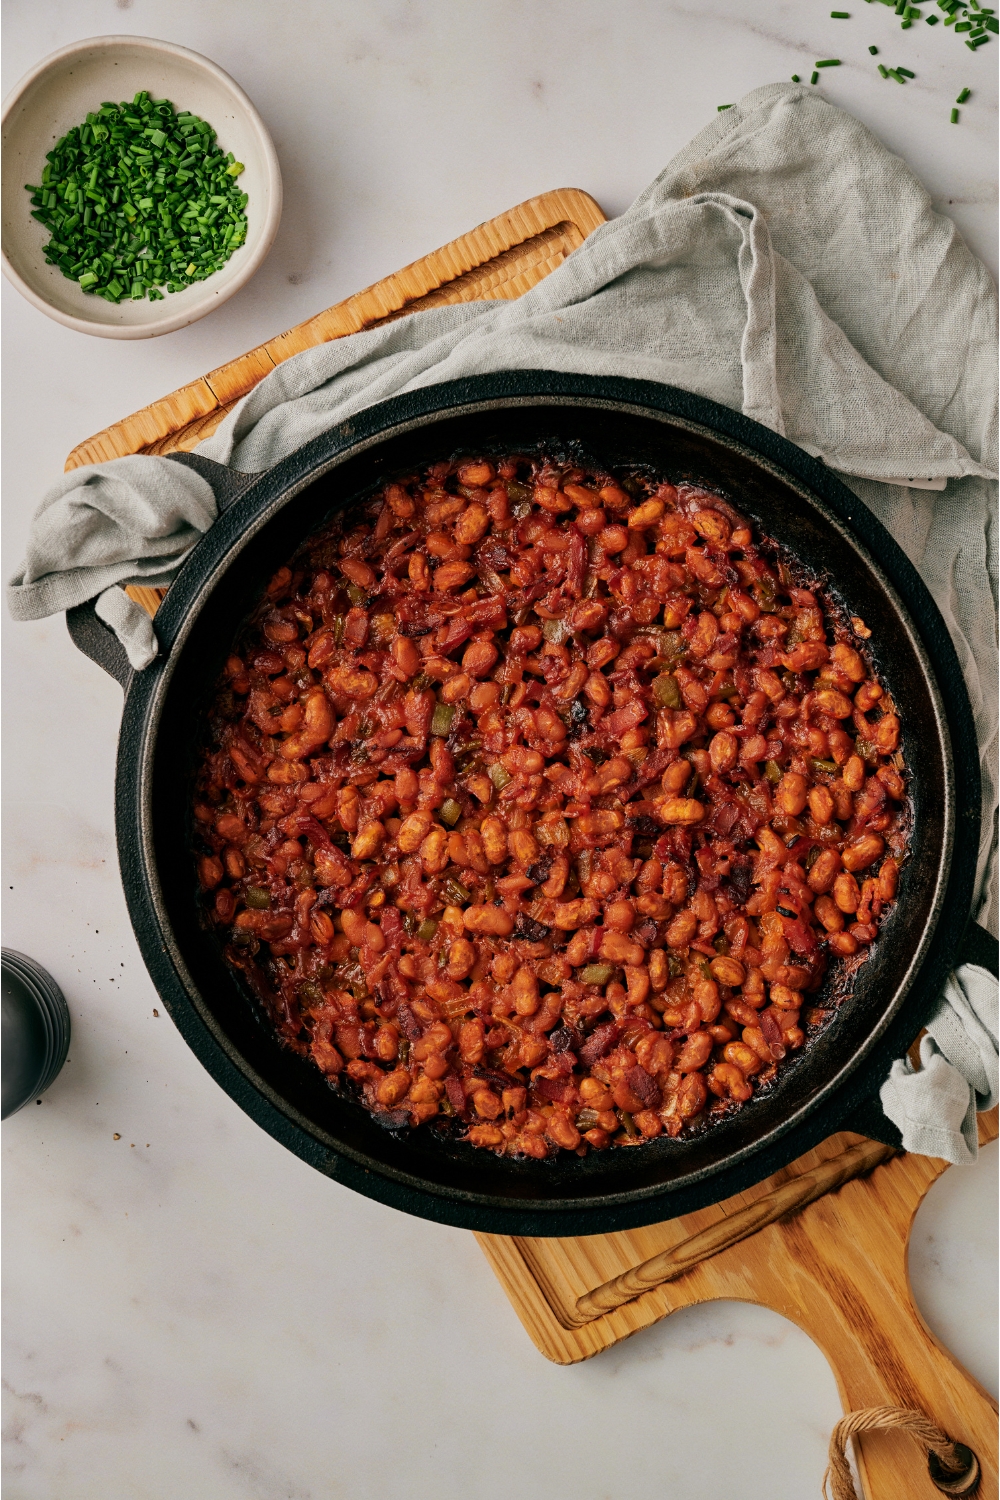 A black skillet atop a wooden board that's filled with freshly baked beans, peppers, and onion.